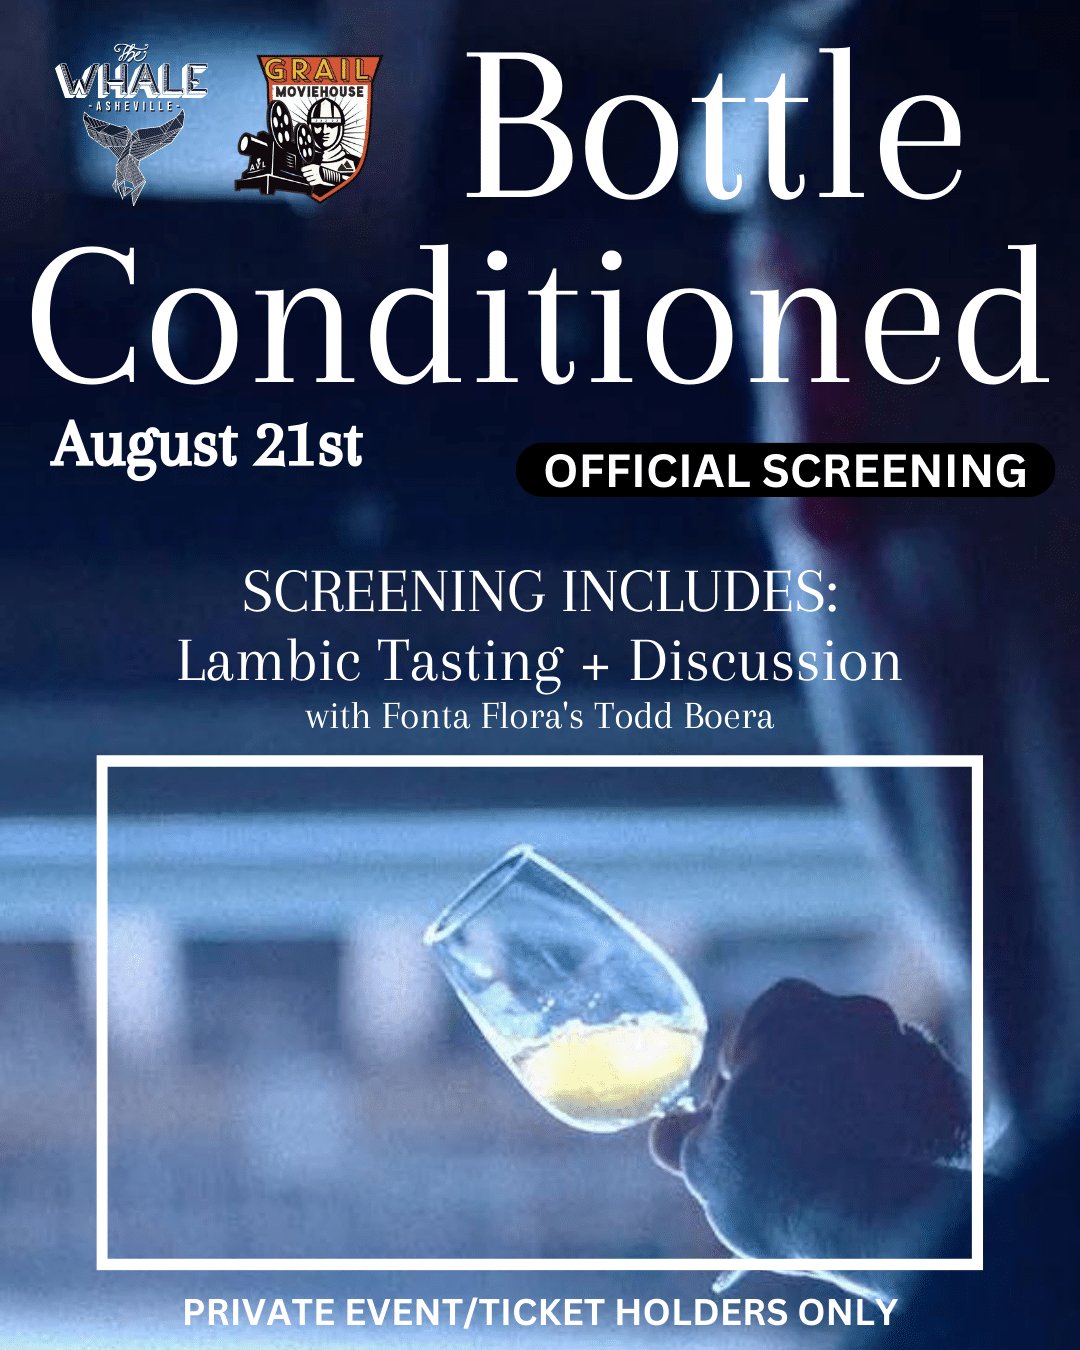 Bottle Conditioned Screening + Fonta Flora Q&A